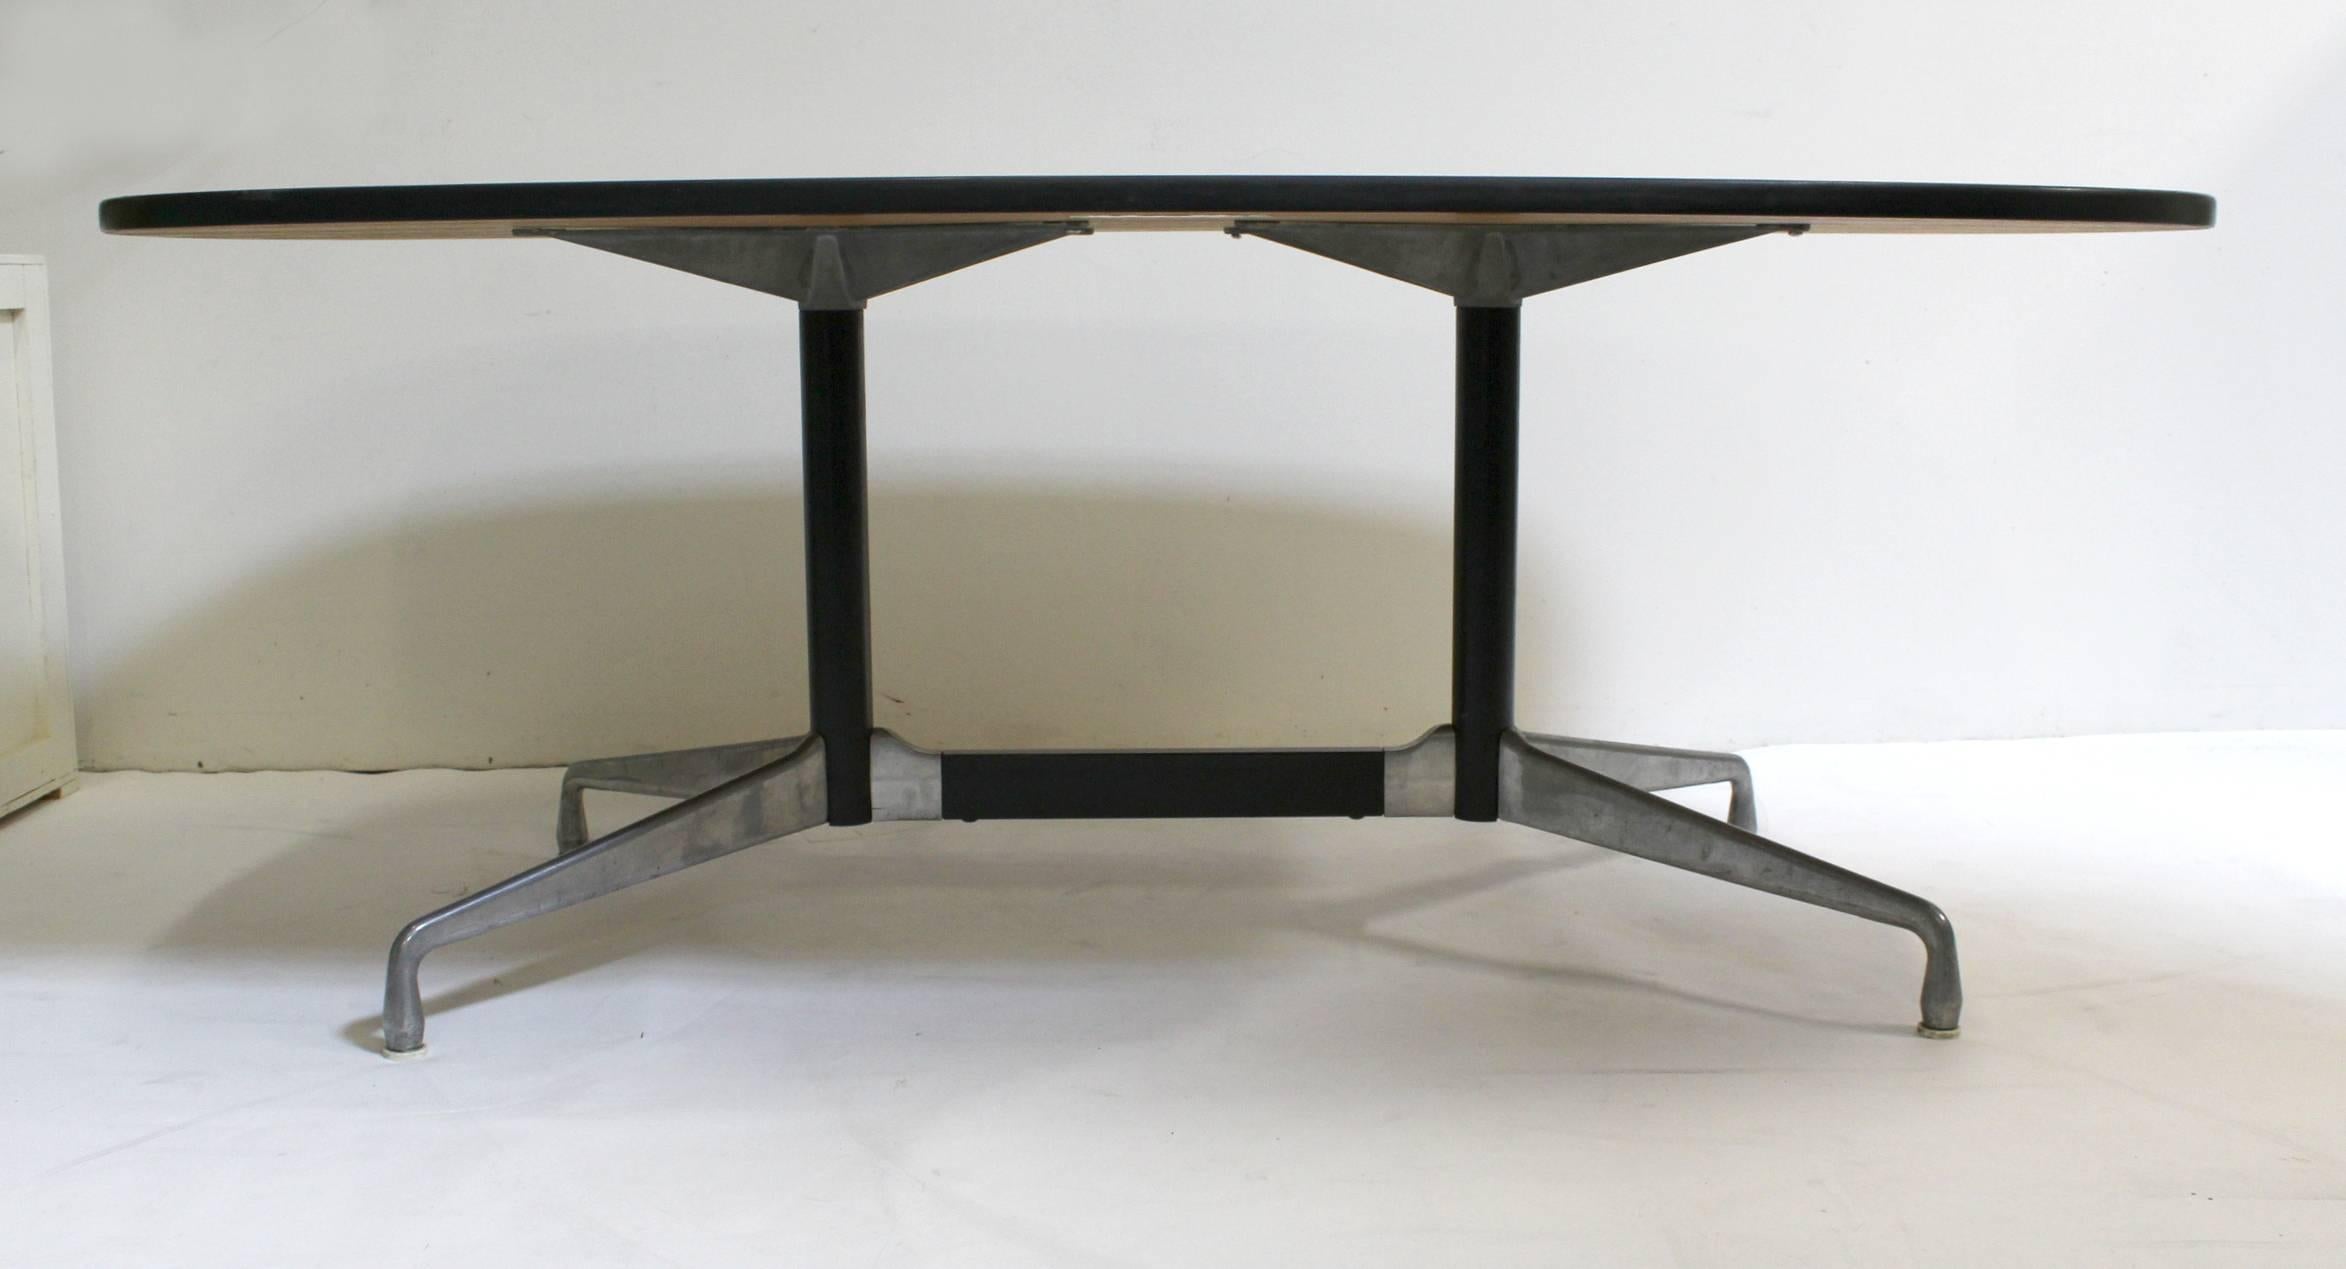 Herman Miller laminate top conference or dining table with a segmented aluminum base designed by Ray and Charles Eames. Featuring a large dark walnut top set on a sturdy aluminum base. Original label is still on the underside.